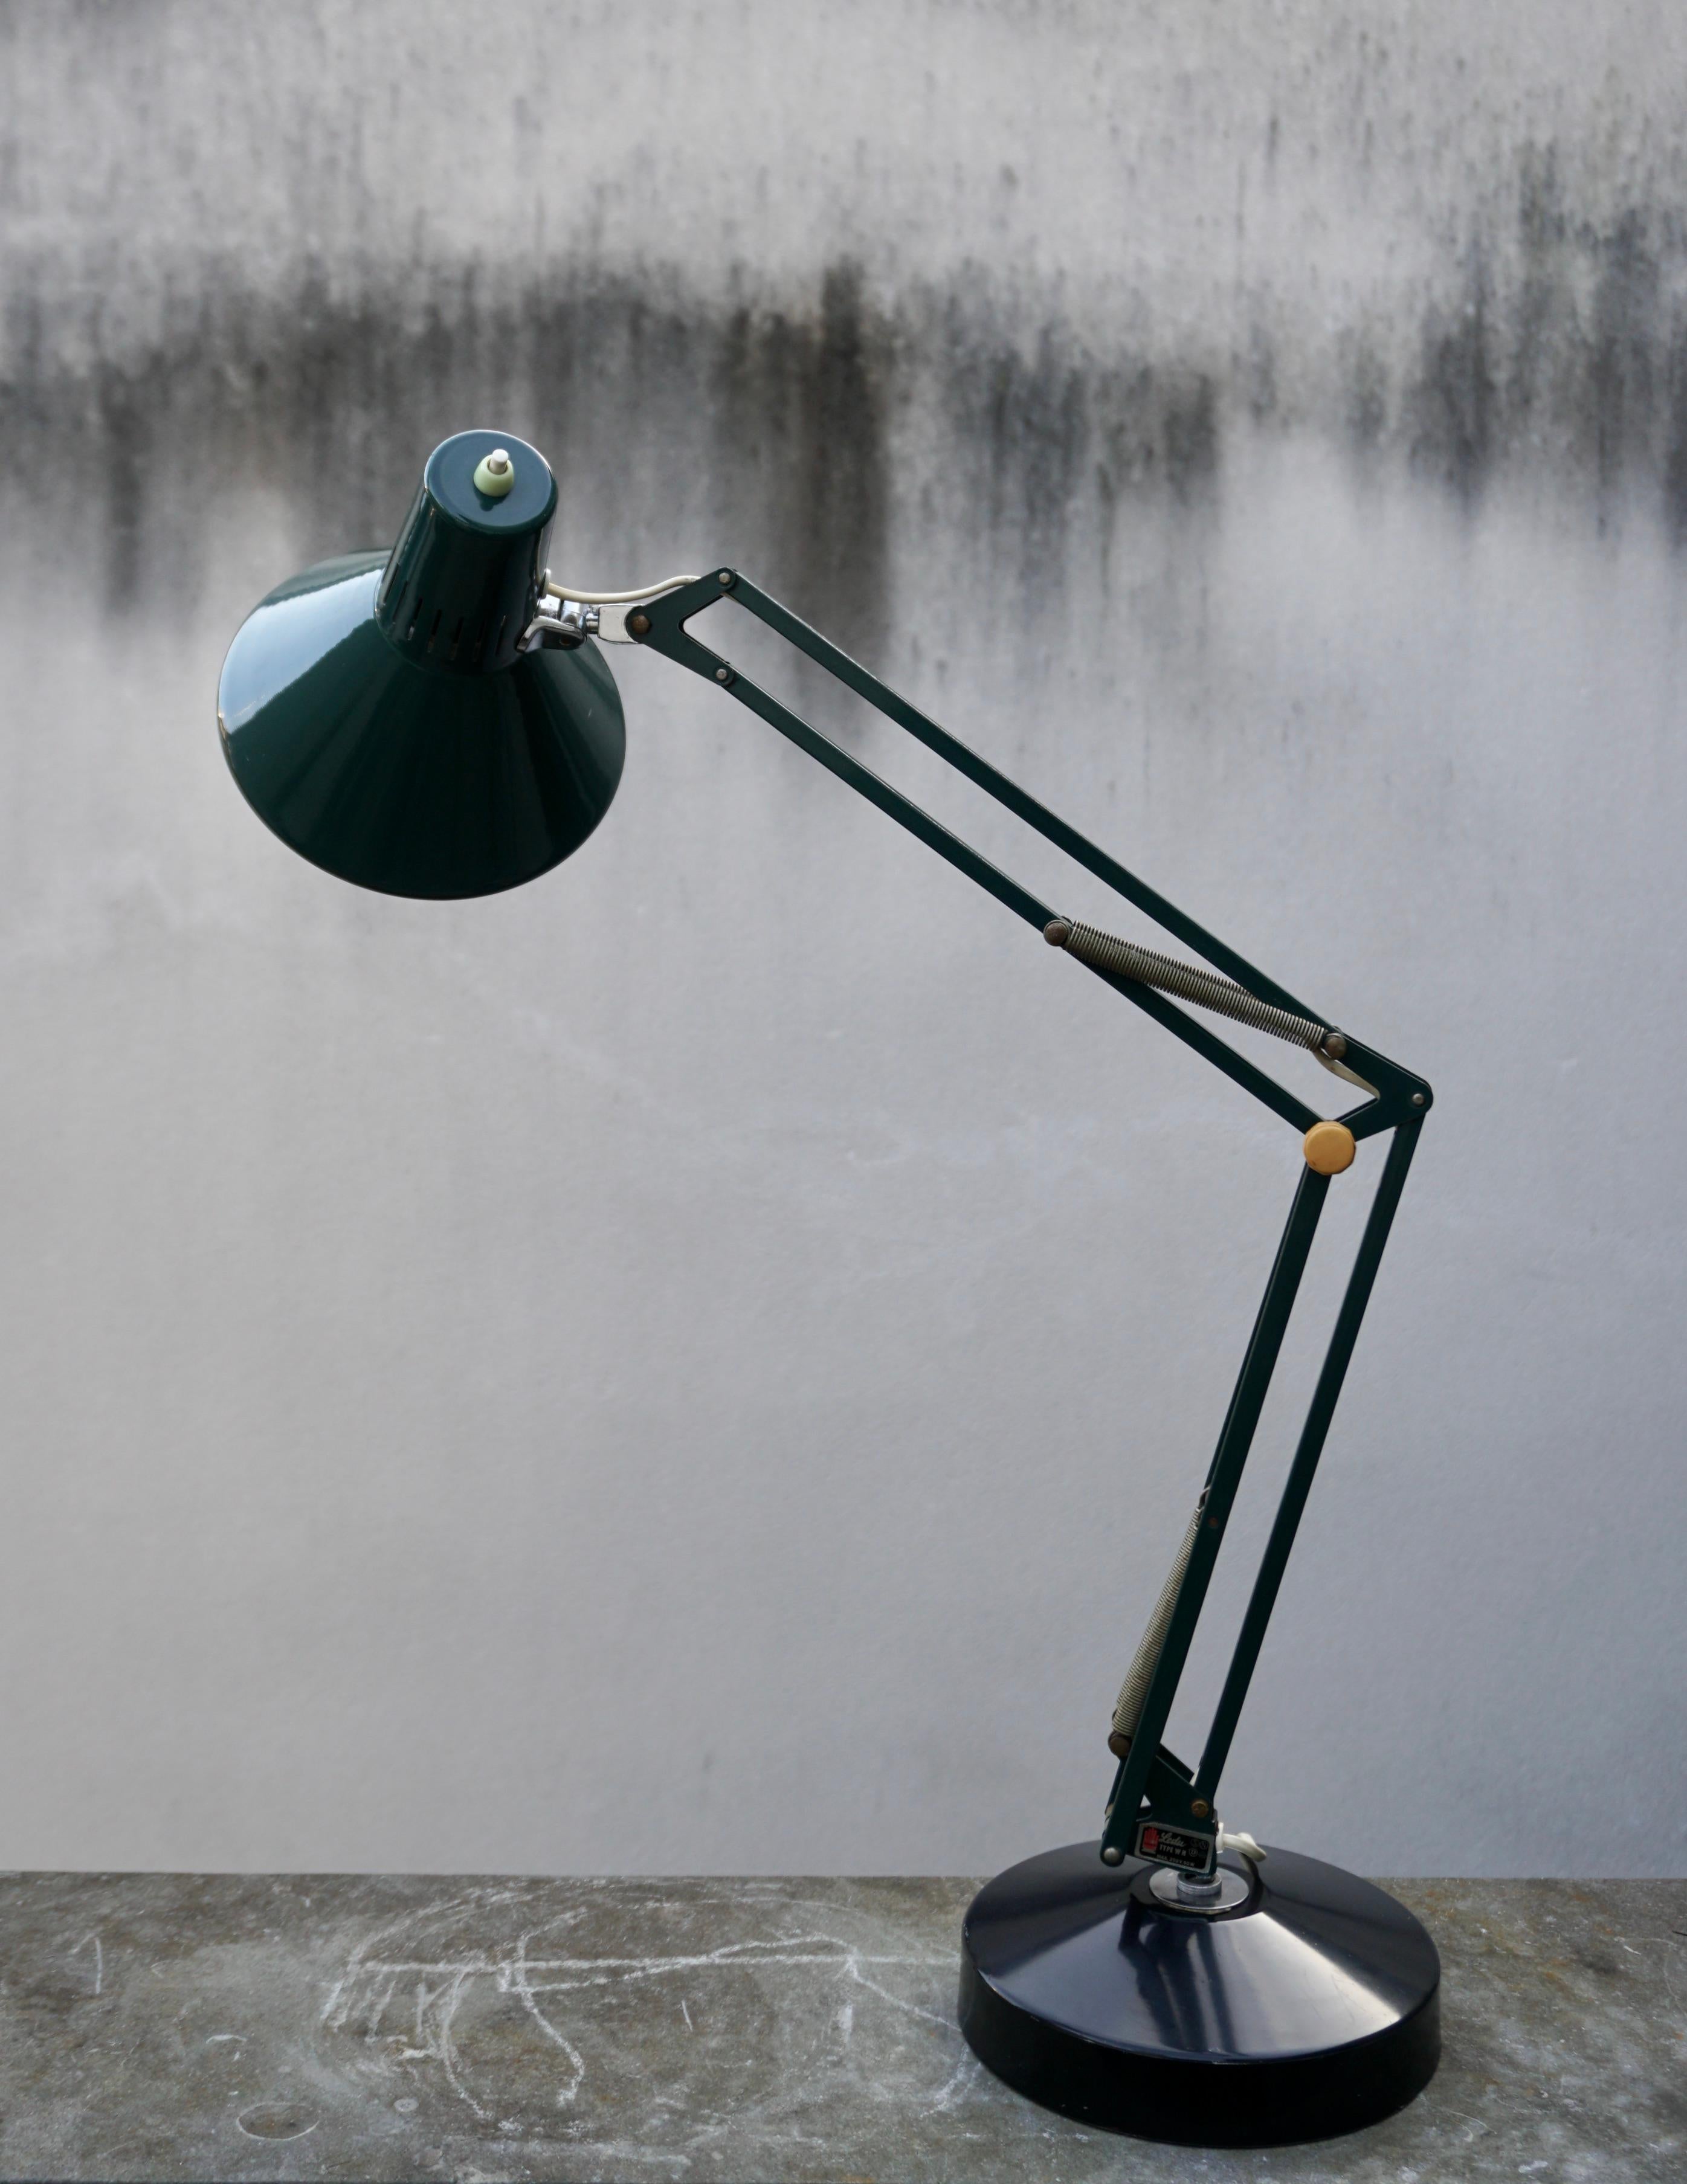 Mid-Century Modern Industrial Office Architect Desk Lamp by Ledu, 1970s, Made in Sweden For Sale